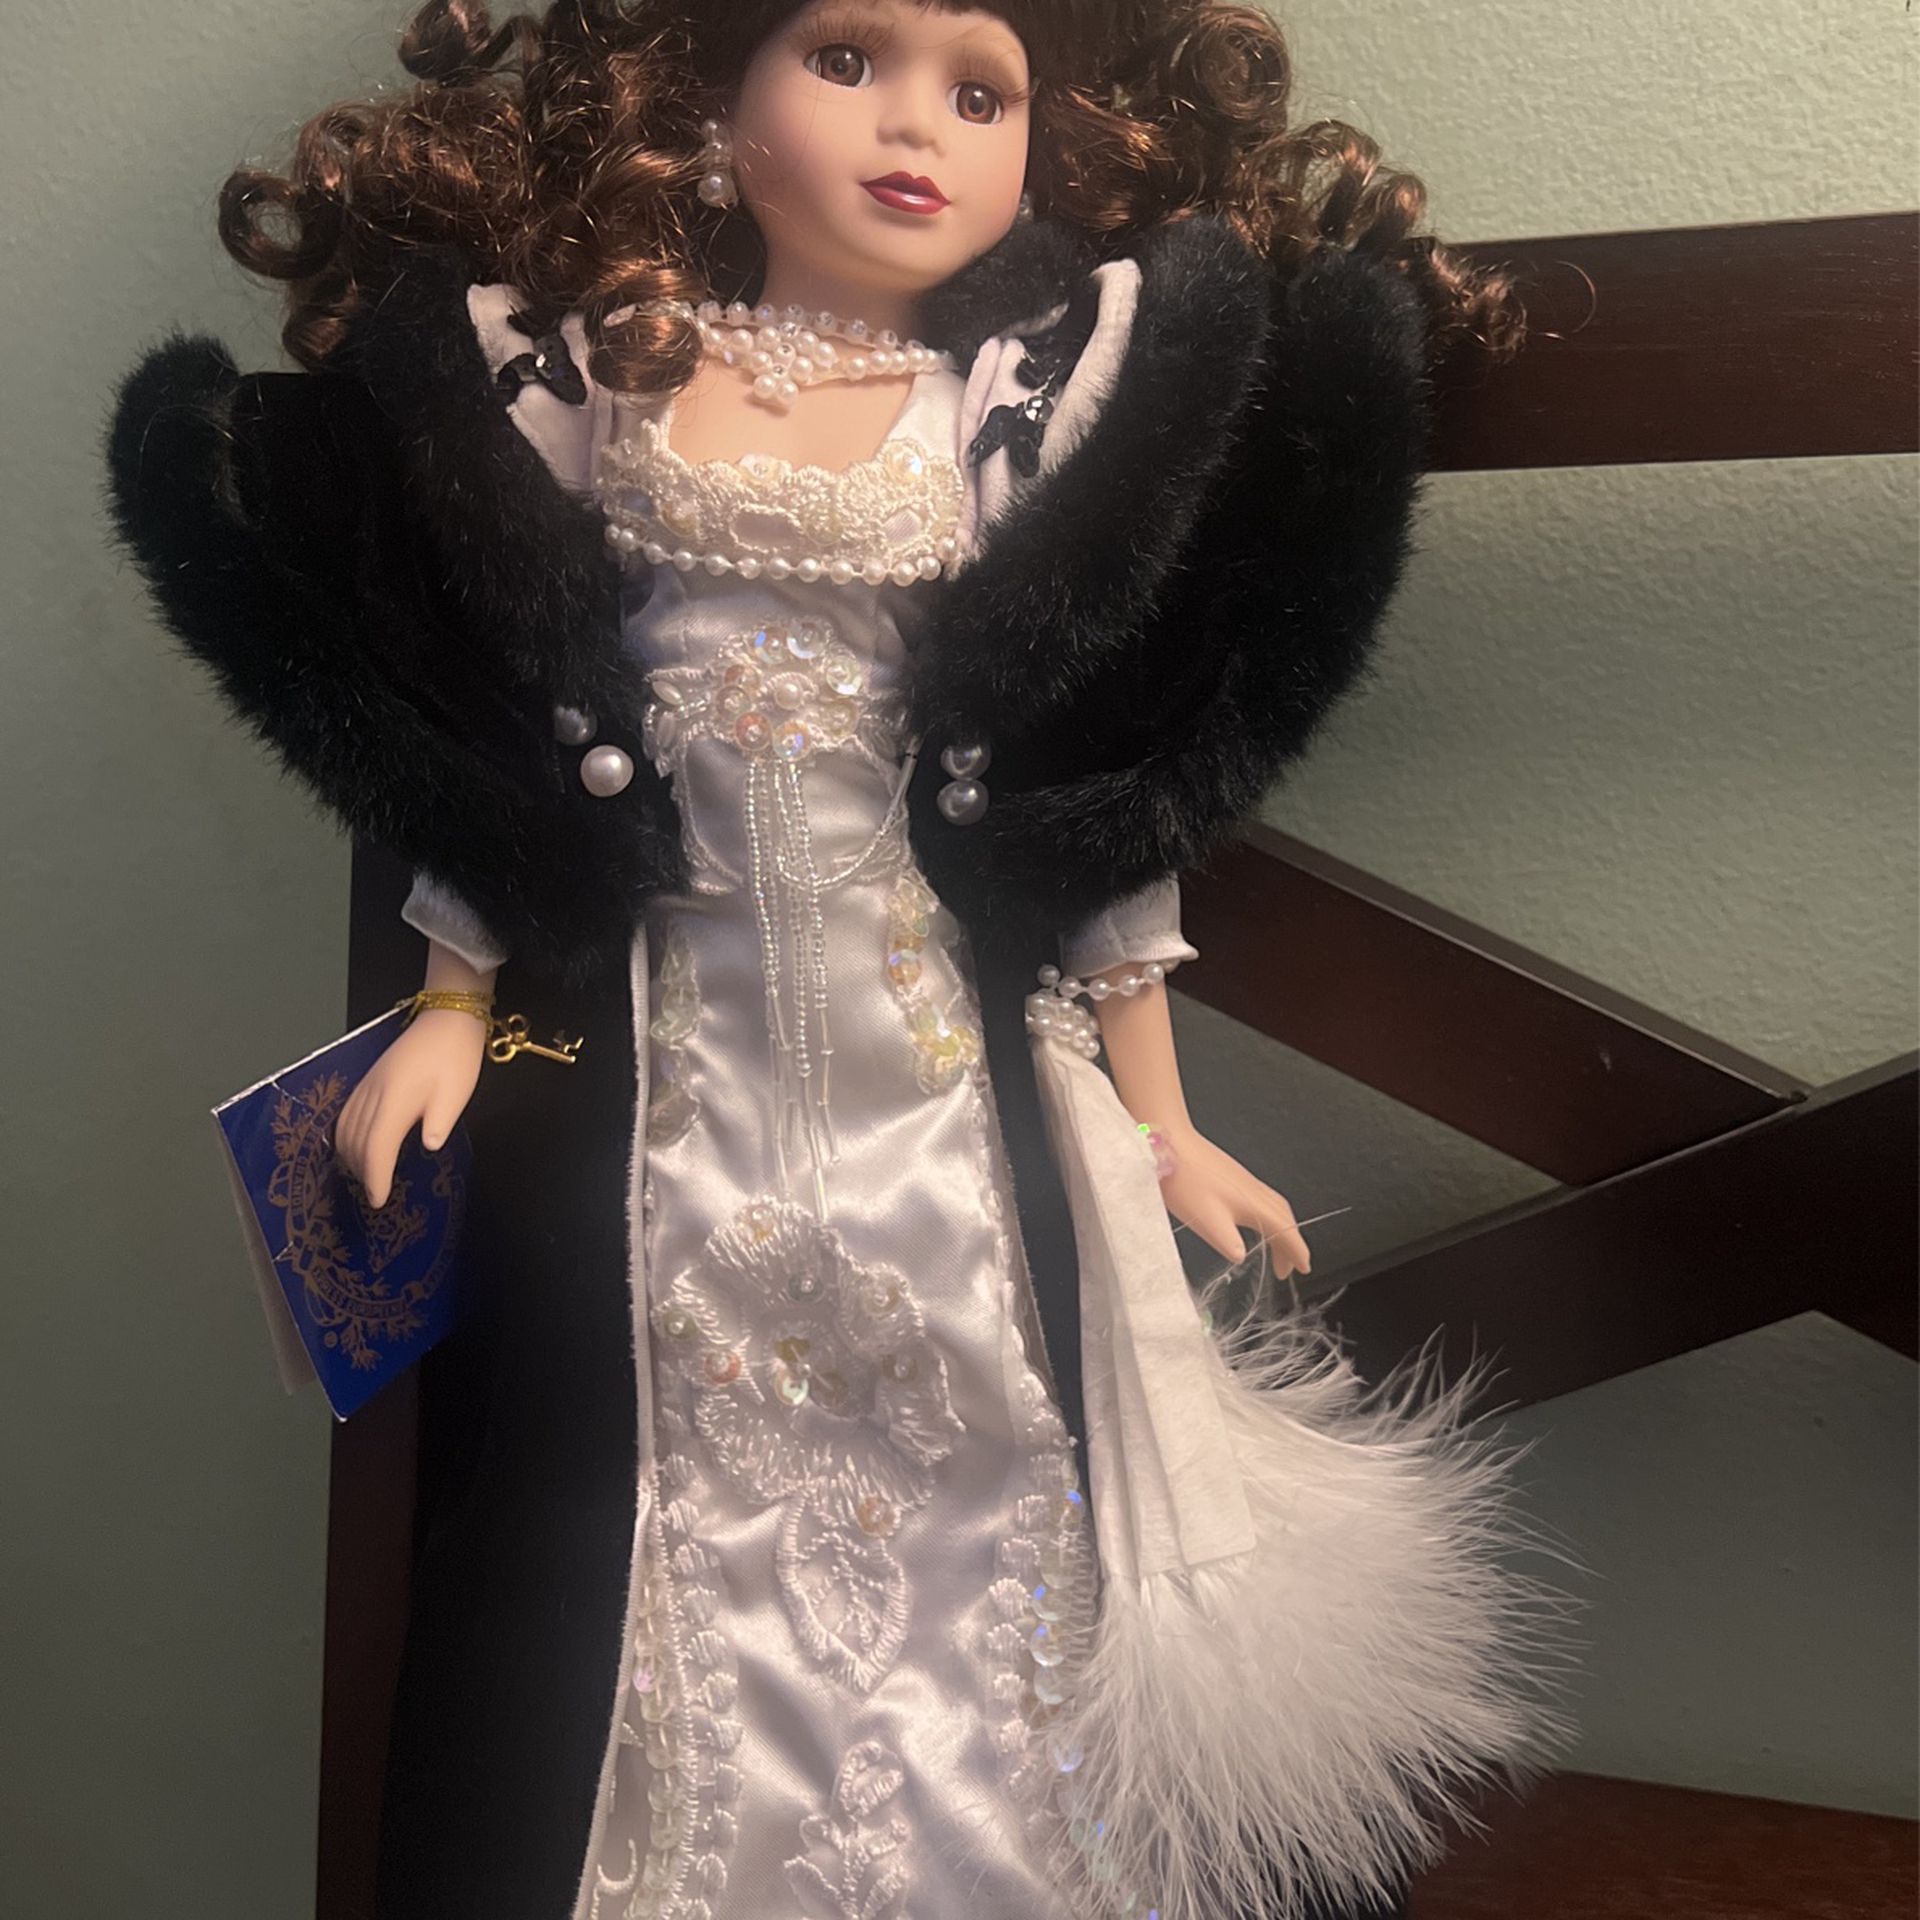 Collectible Porcelain Doll